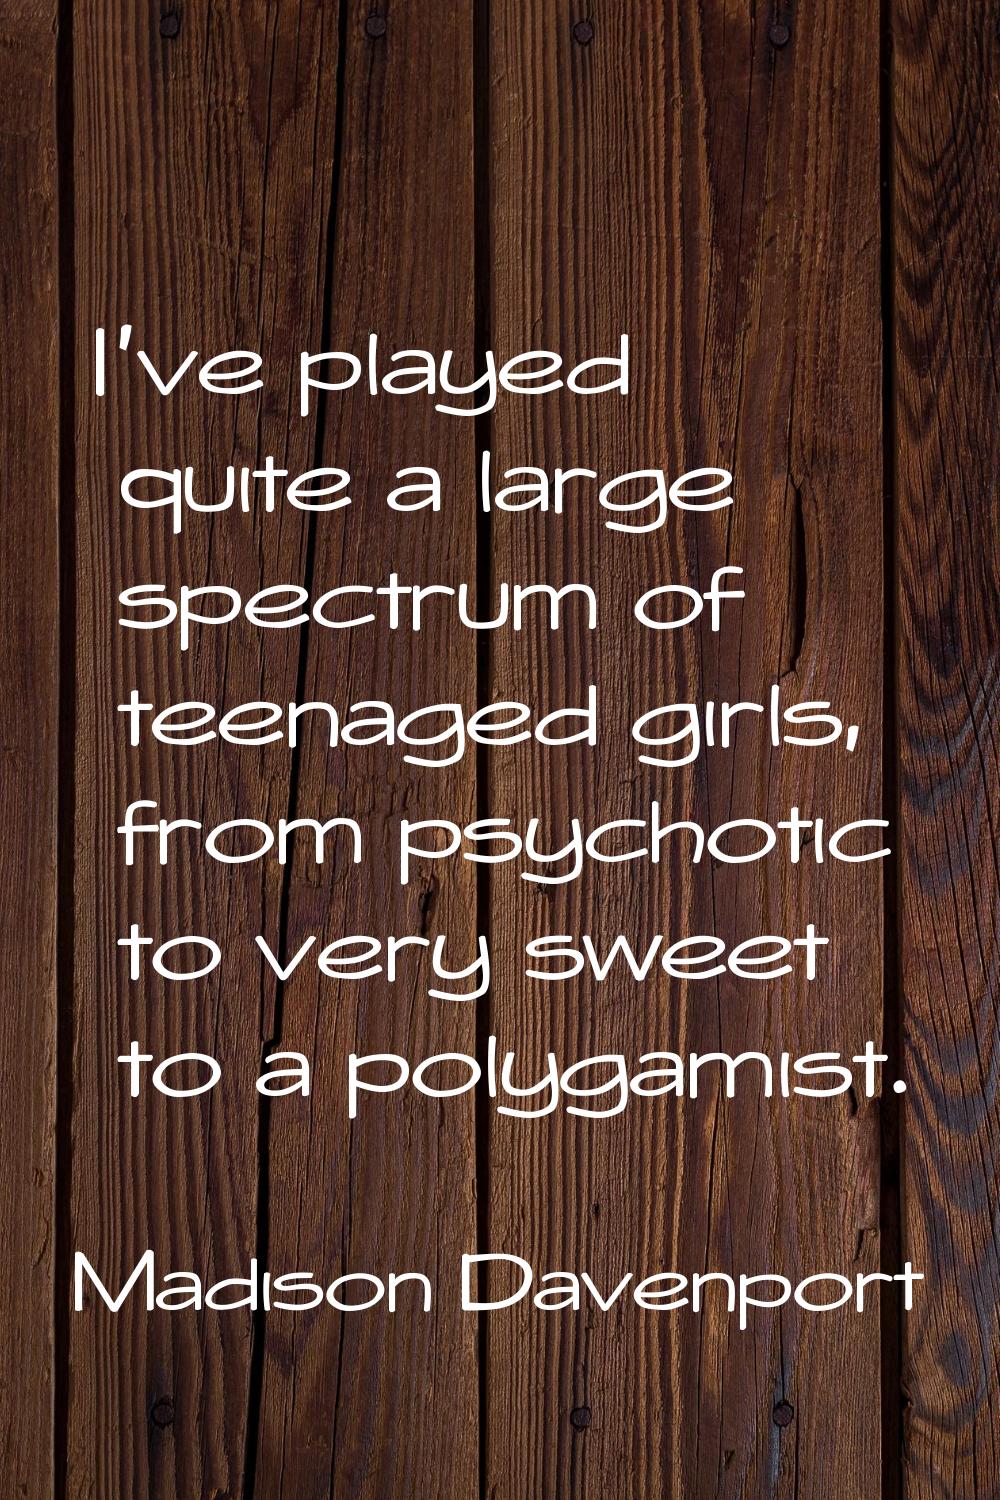 I've played quite a large spectrum of teenaged girls, from psychotic to very sweet to a polygamist.